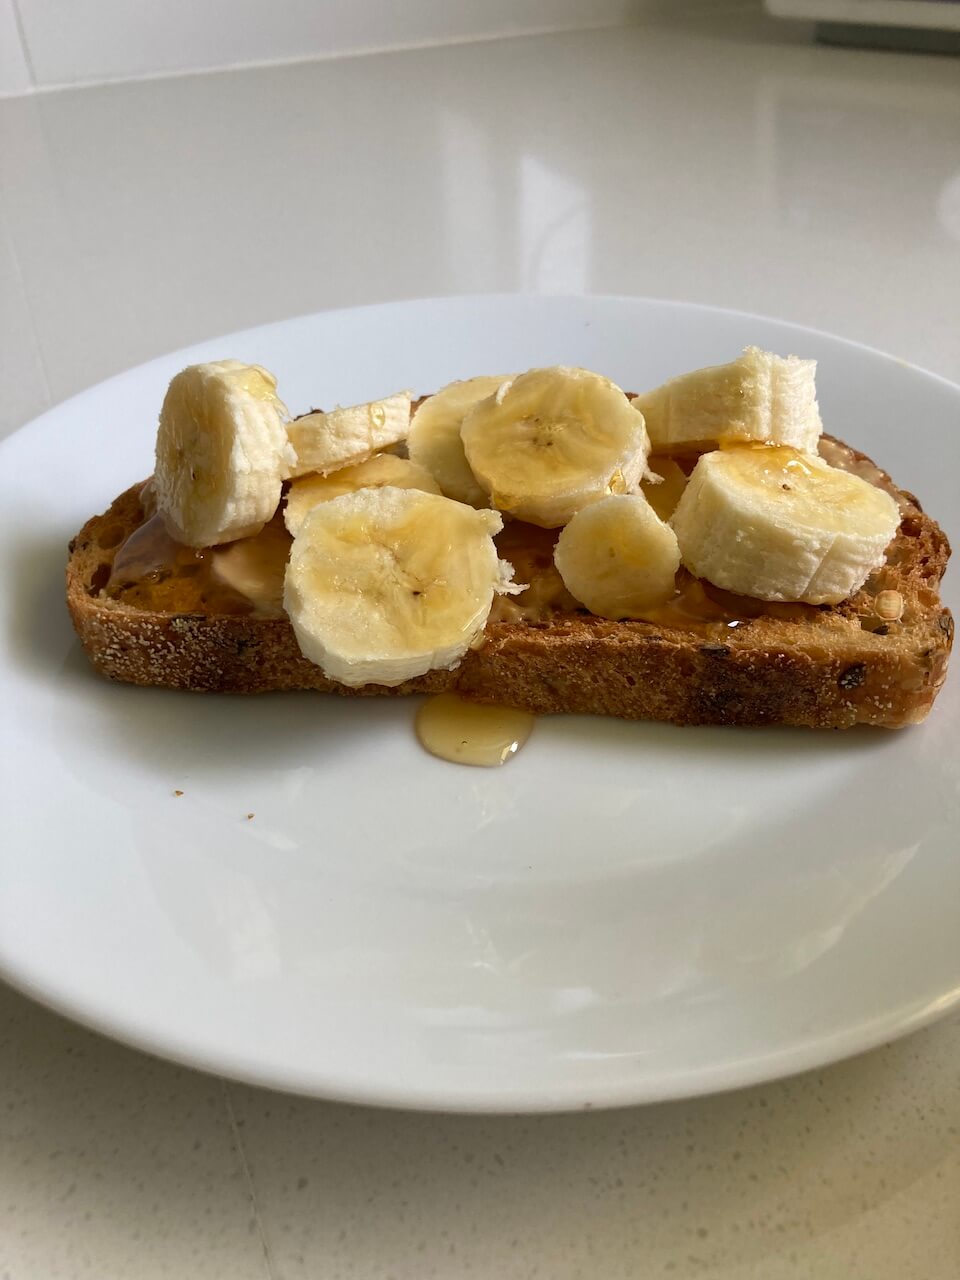 bananas, peanut butter and honey on sourdough-favourites post